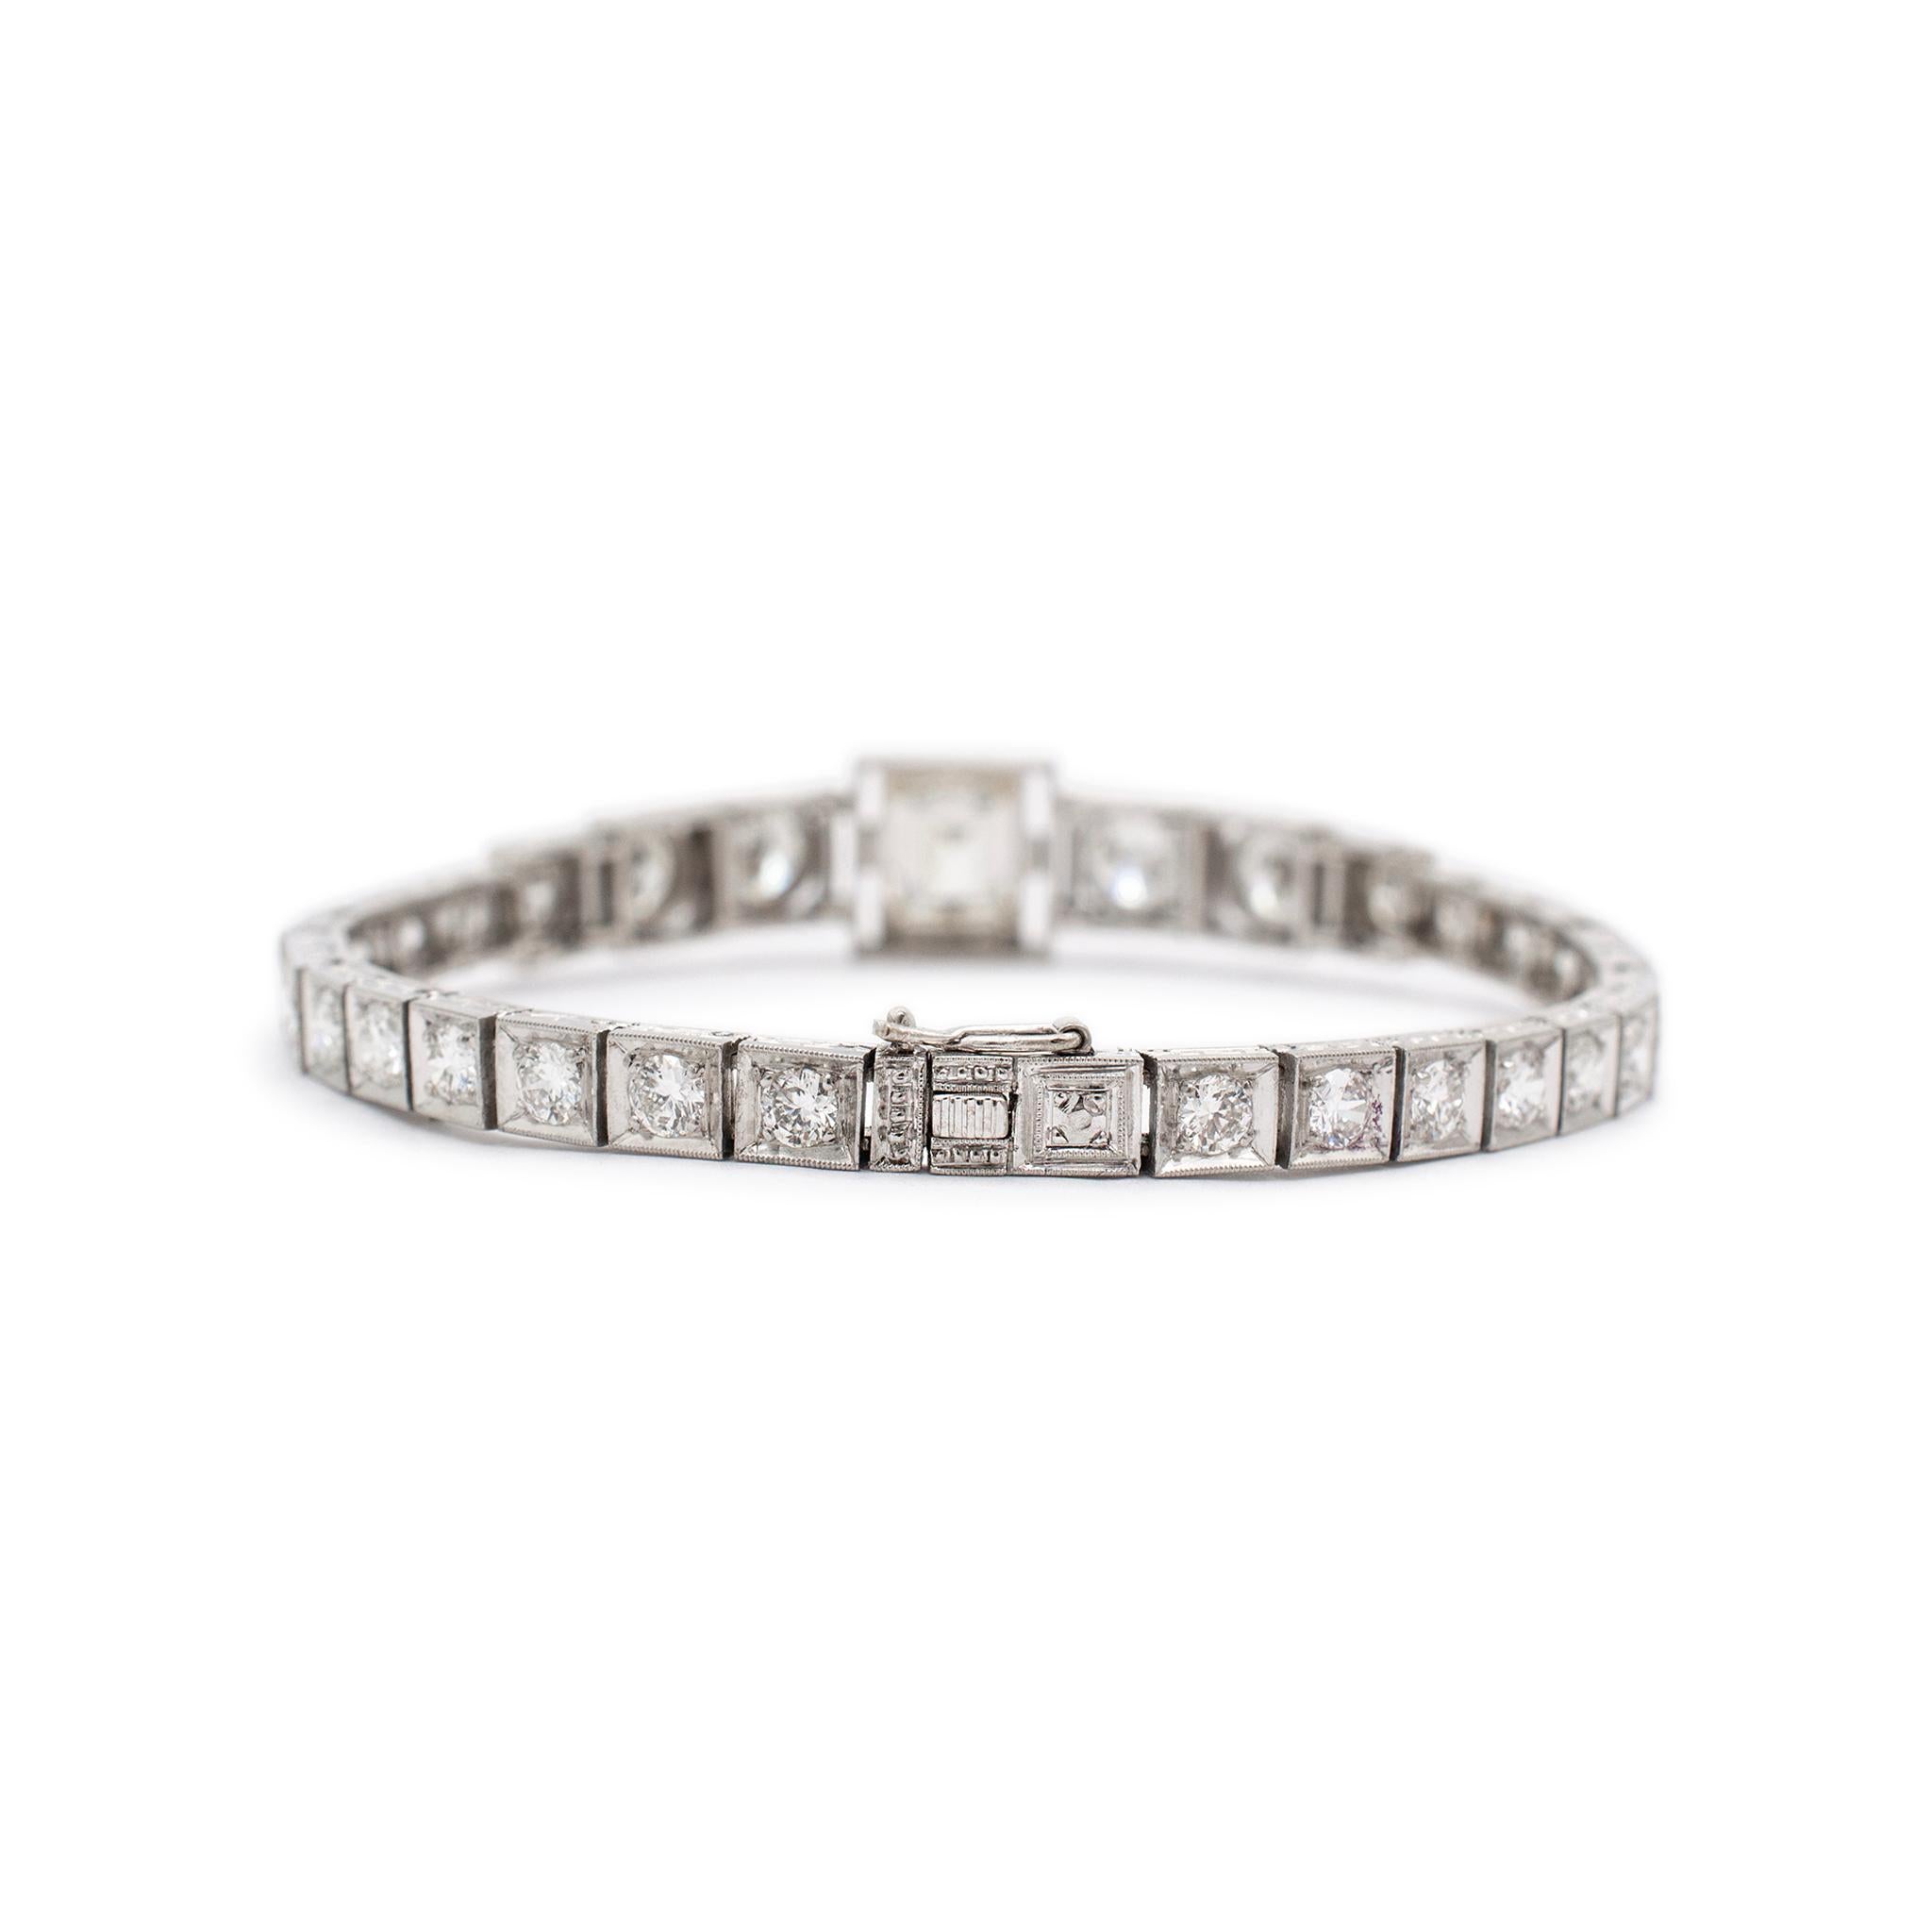 Gender: Ladies

Metal Type: Platinum

Length: 6.50 Inches

Width: 10.05 mm tapering to 4.25 mm

Weight: 21.10 grams
Ladies filigree-style textured platinum diamond contemporary-style tennis link bracelet. The metal was tested and determined to be